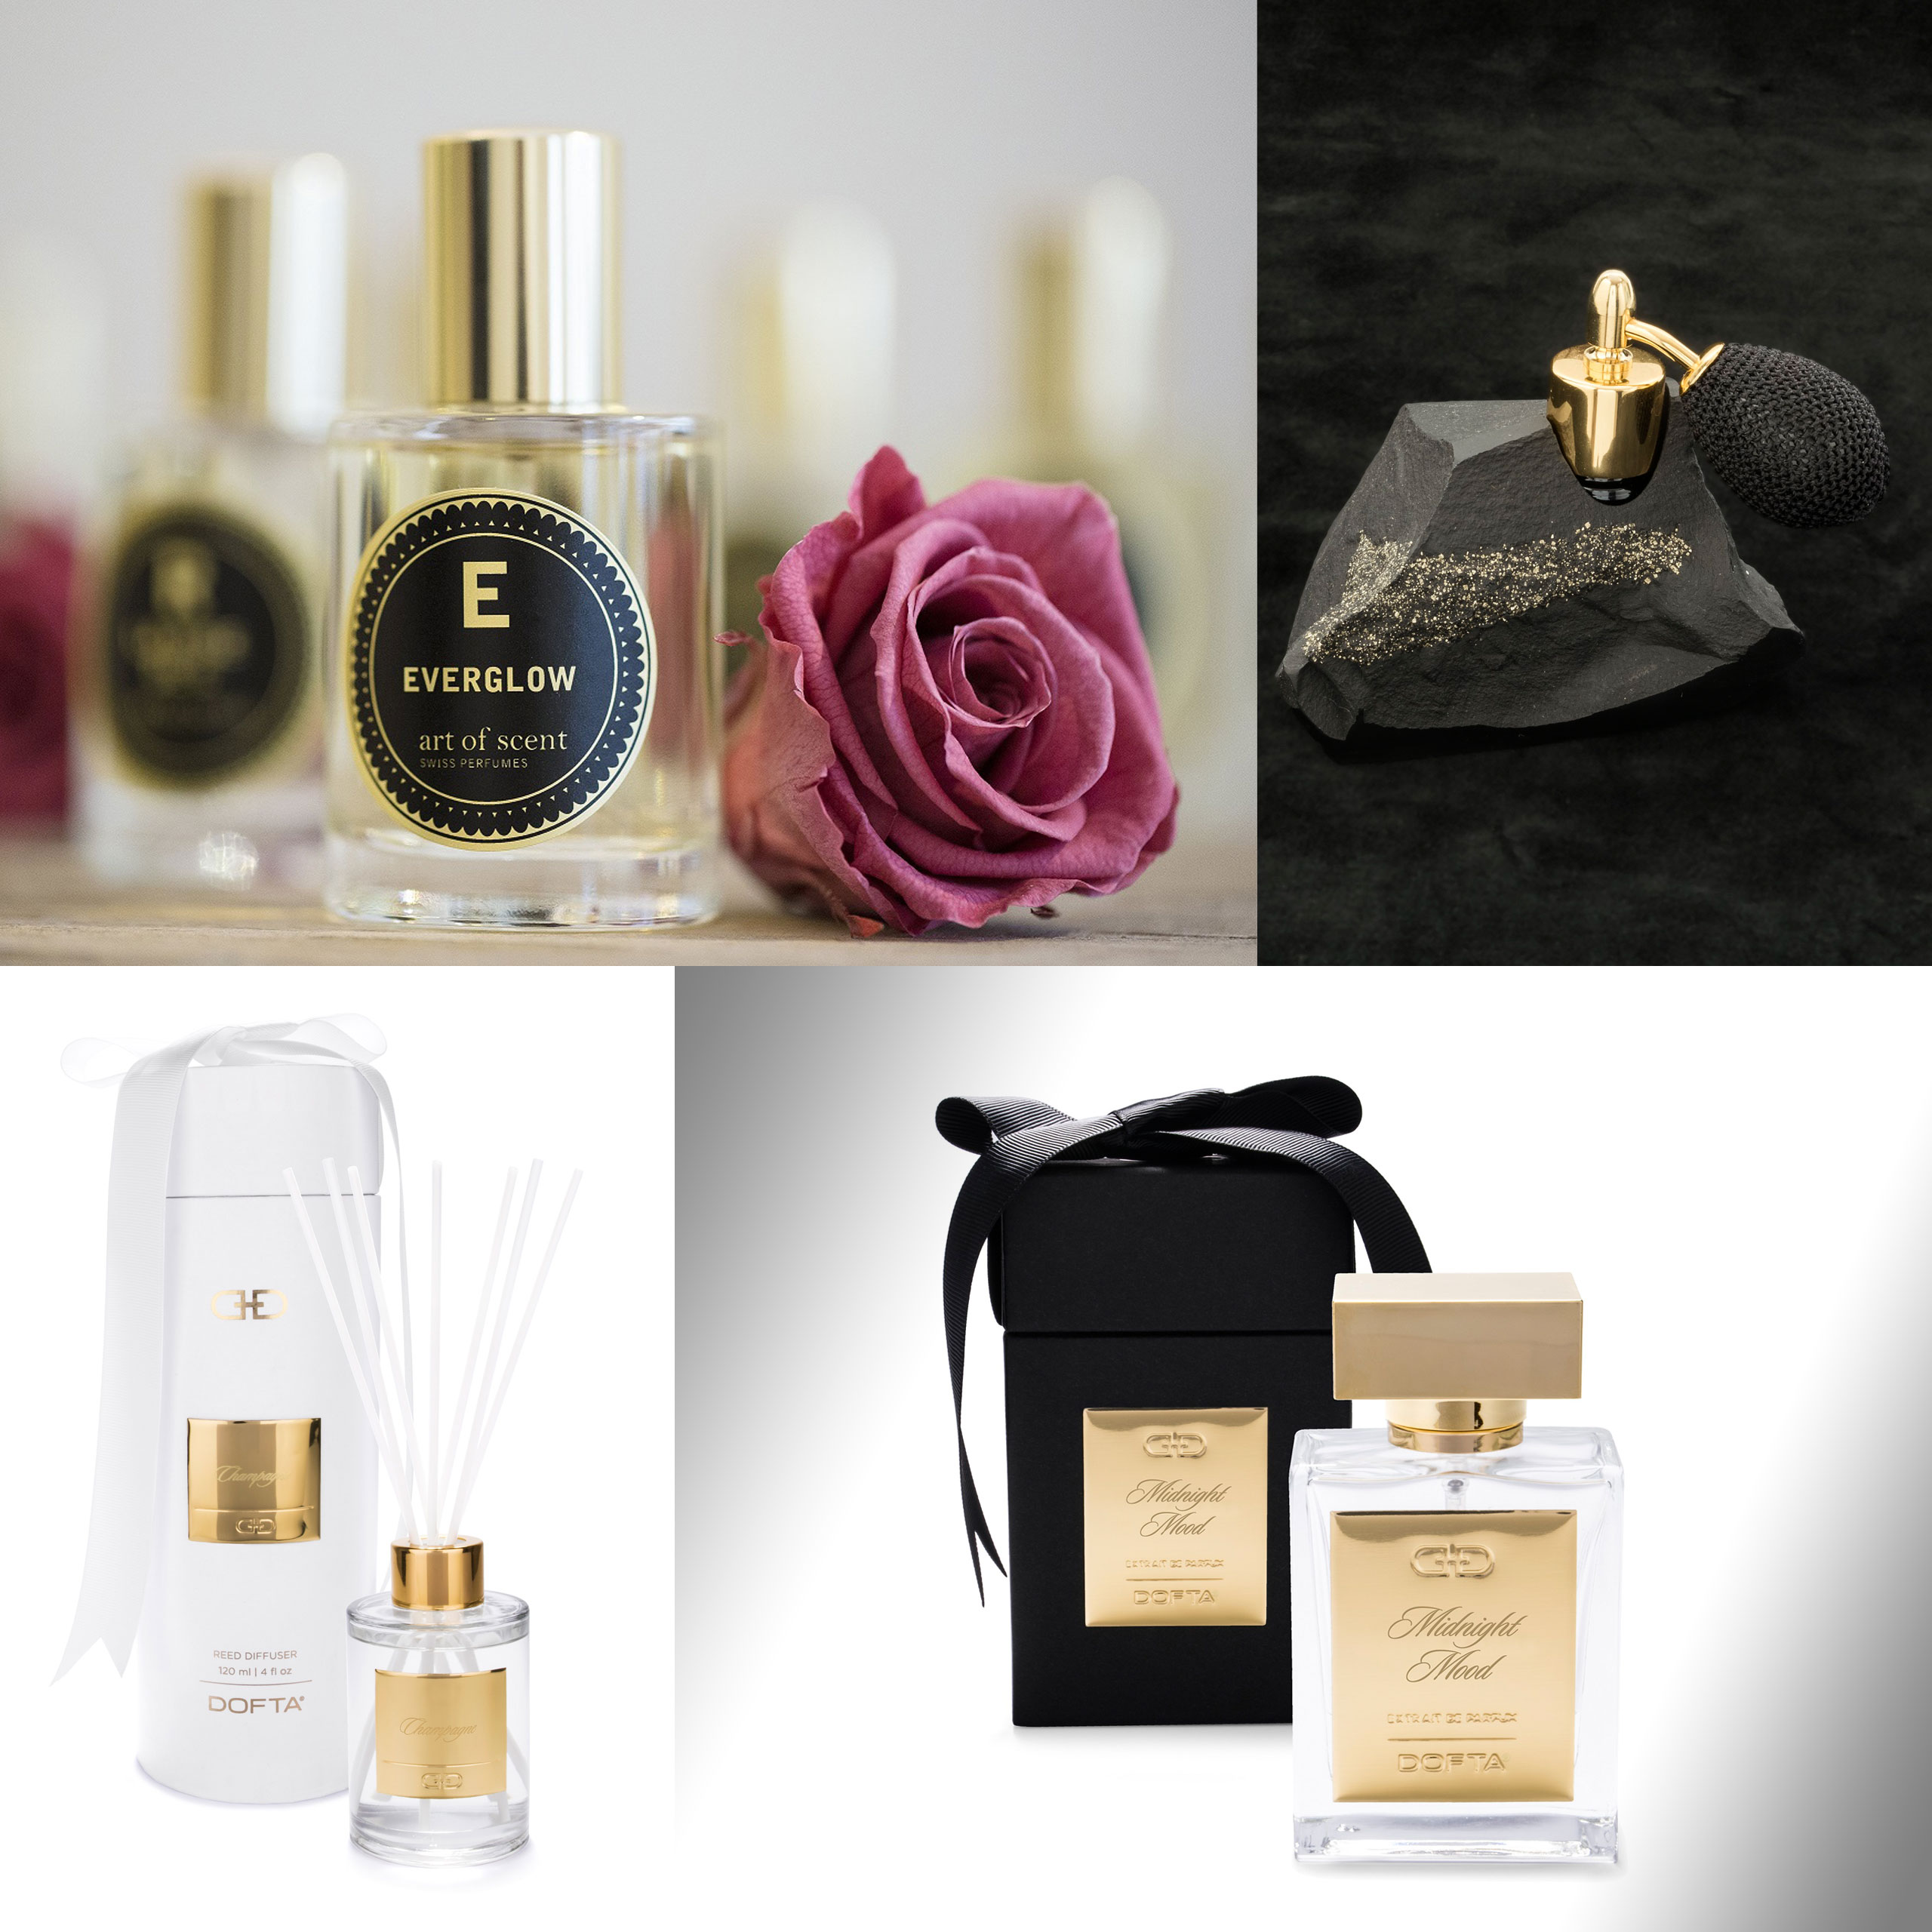 Beautyworld Middle East - Perfumes inspired by therapeutic work with blind children among niche fragrances set for debut at Beautyworld Middle East 2018